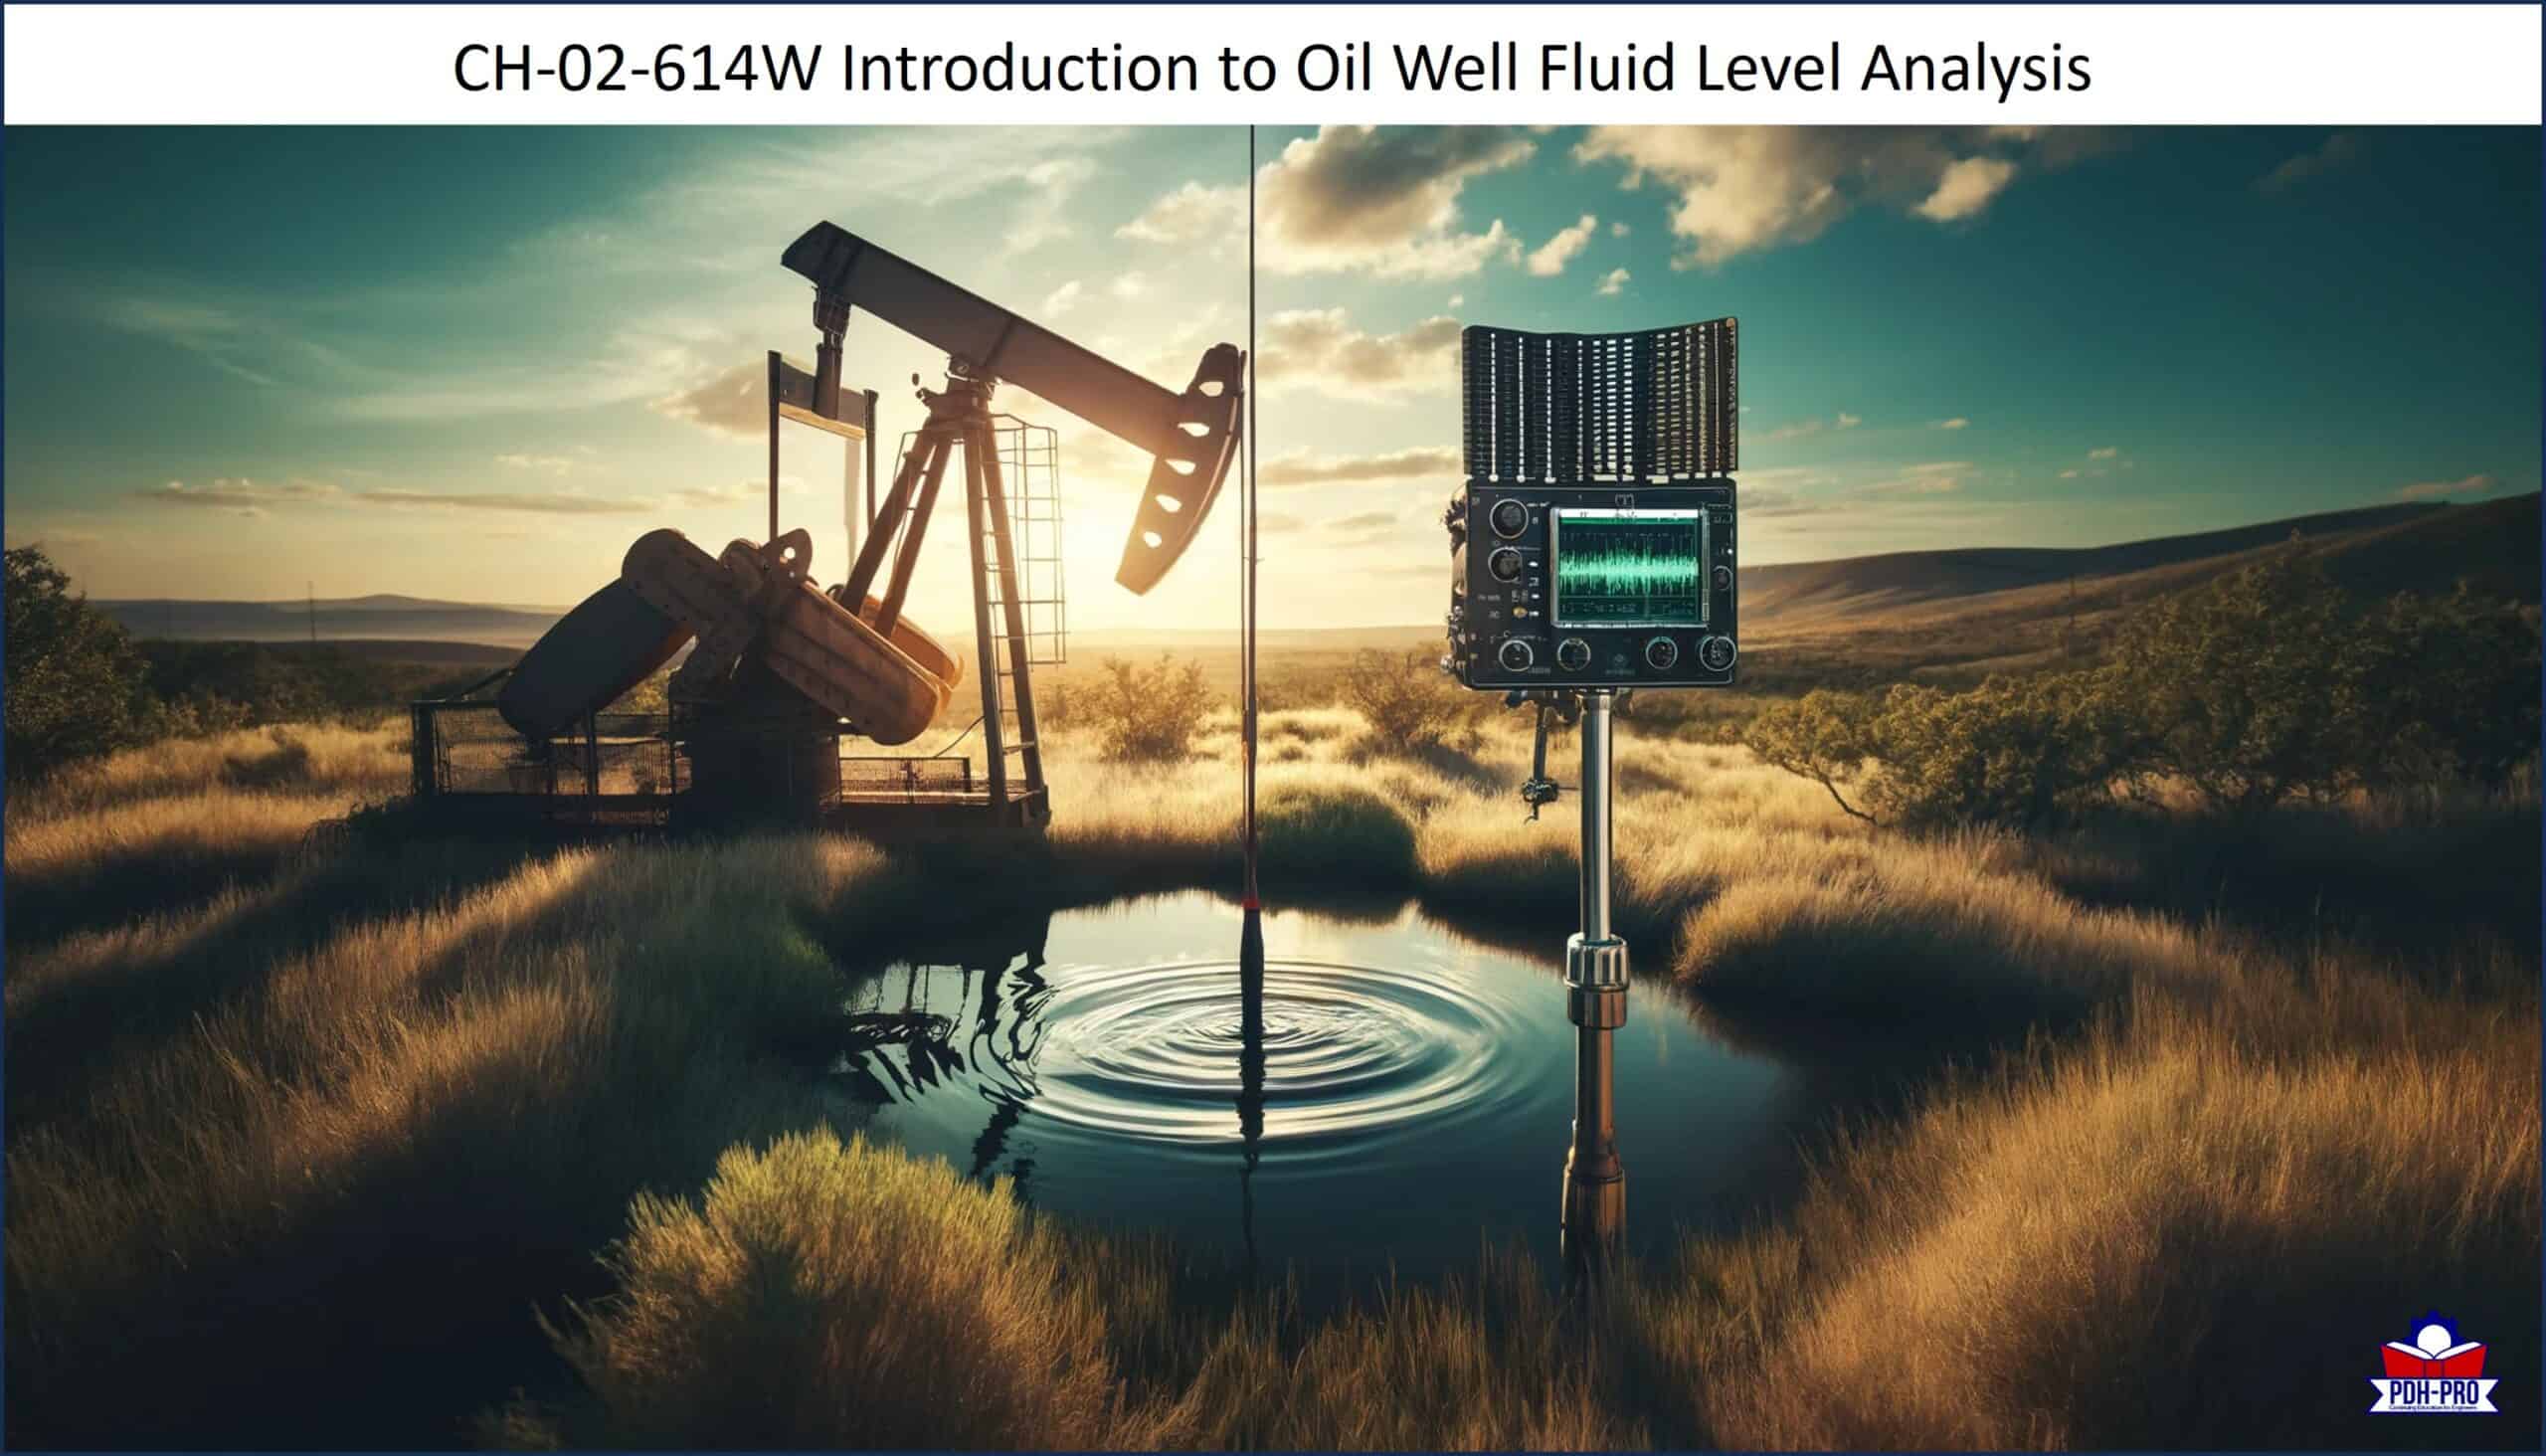 Introduction to Oil Well Fluid Level Analysis